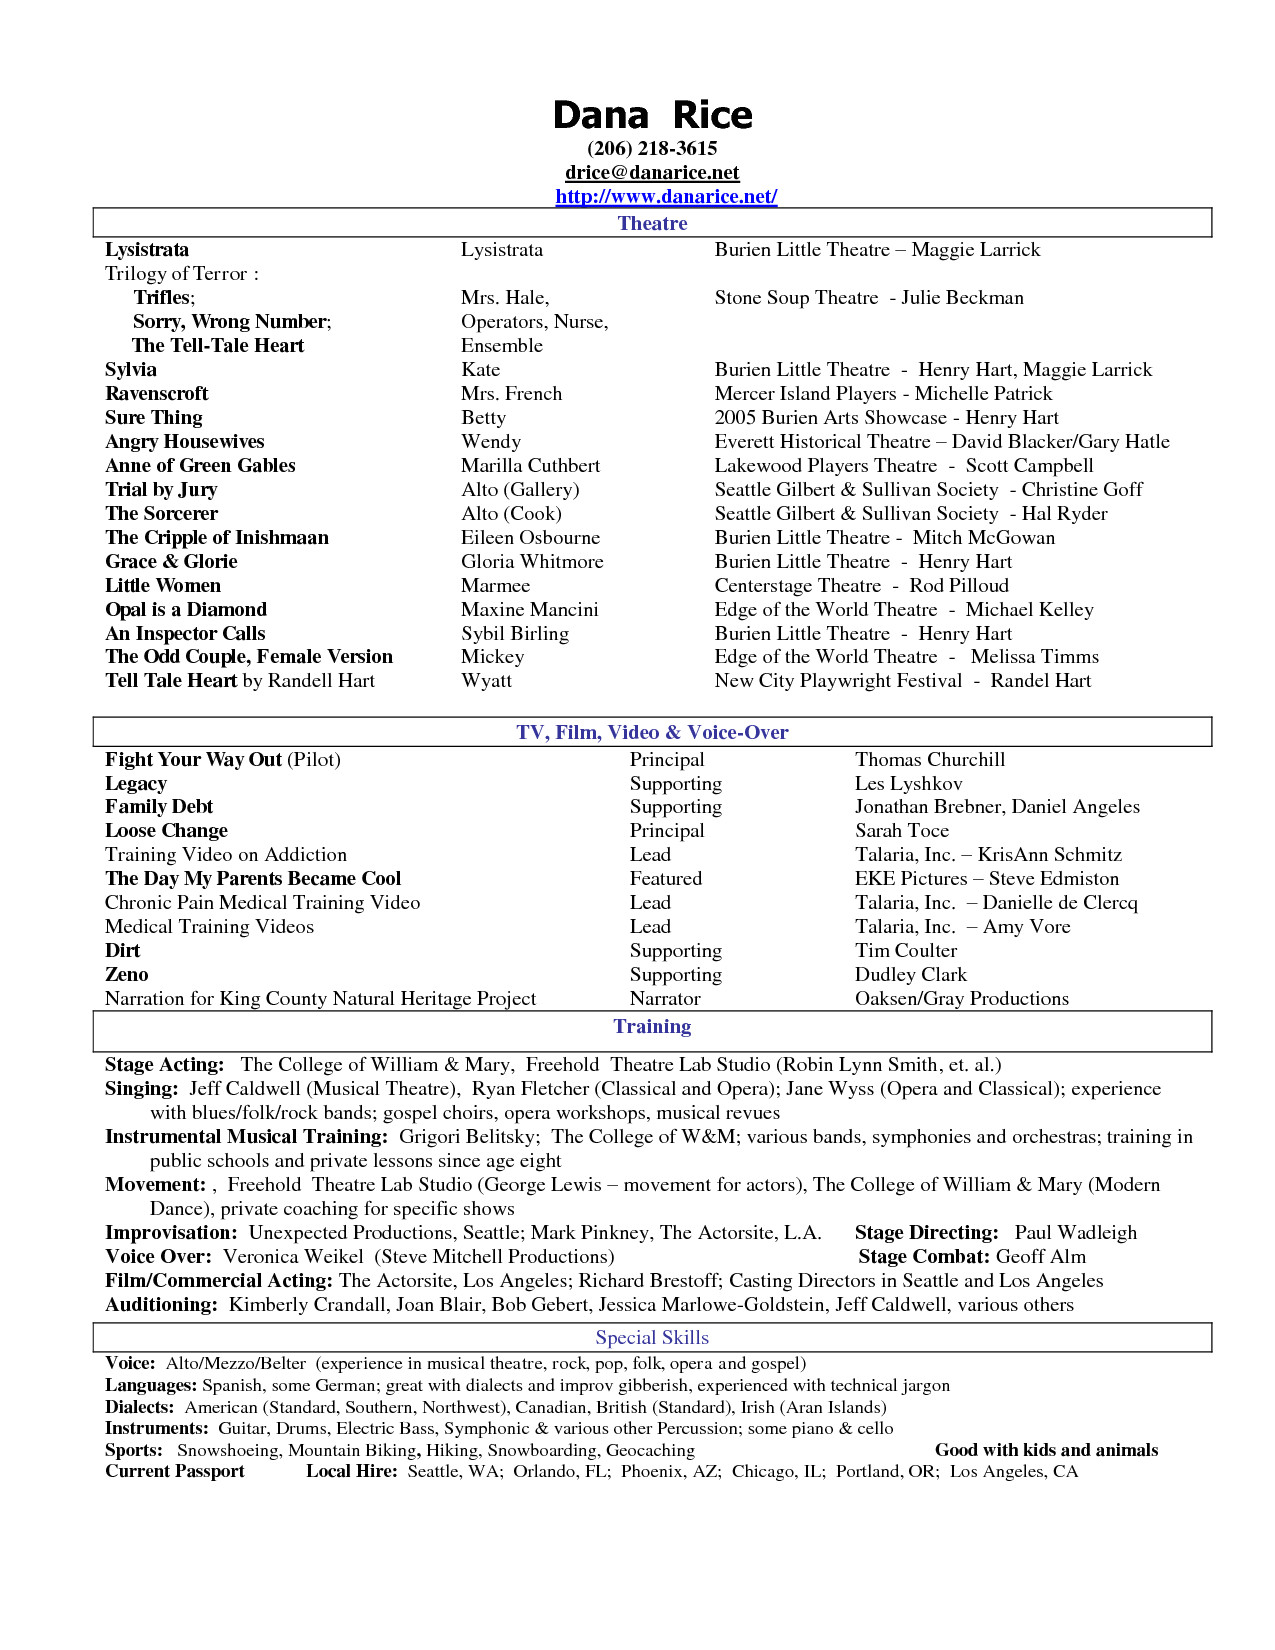 resumes template with quotes